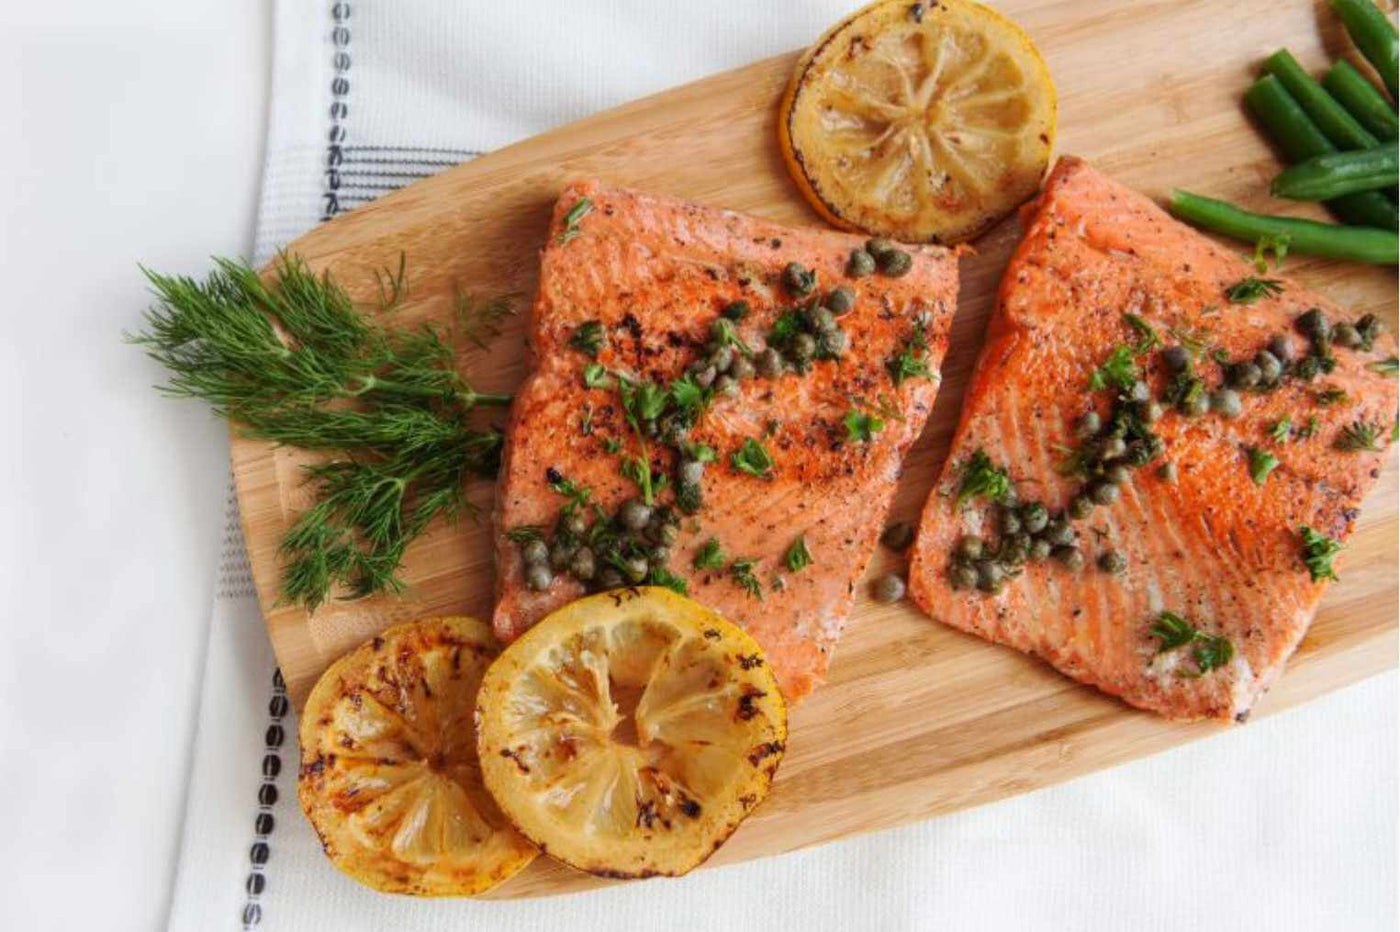 Two cooked wild caught salmon portions on a cutting board with lemon and garnishes.